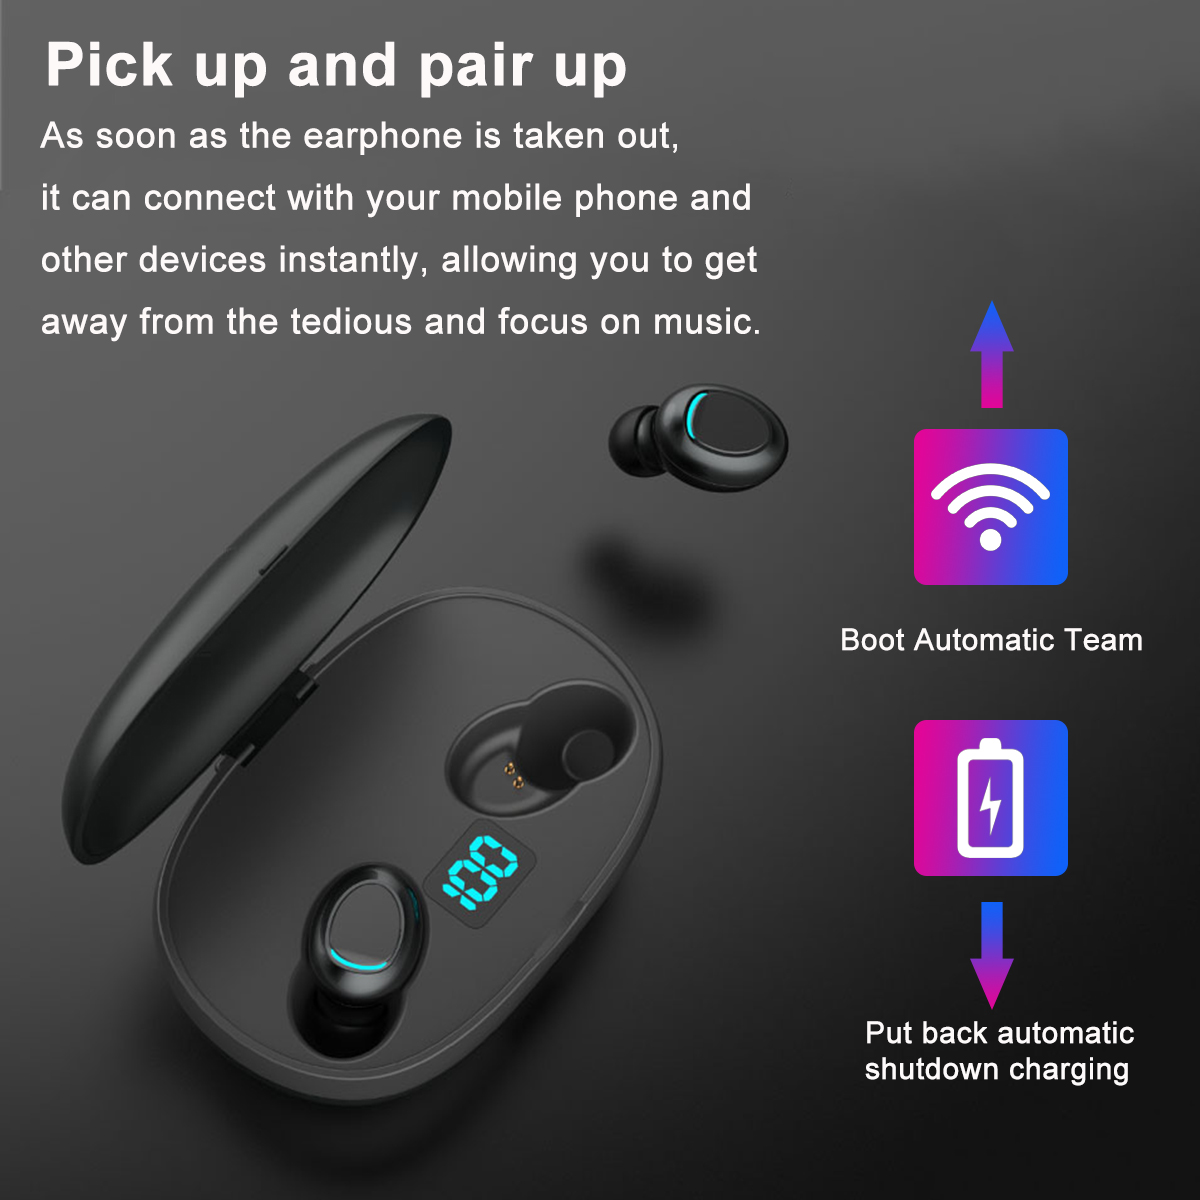 Dual-Digital-Display-True-Wireless-Headset-Button-Touch-bluetooth-50-Earphone-with-Portable-Charging-1565020-7